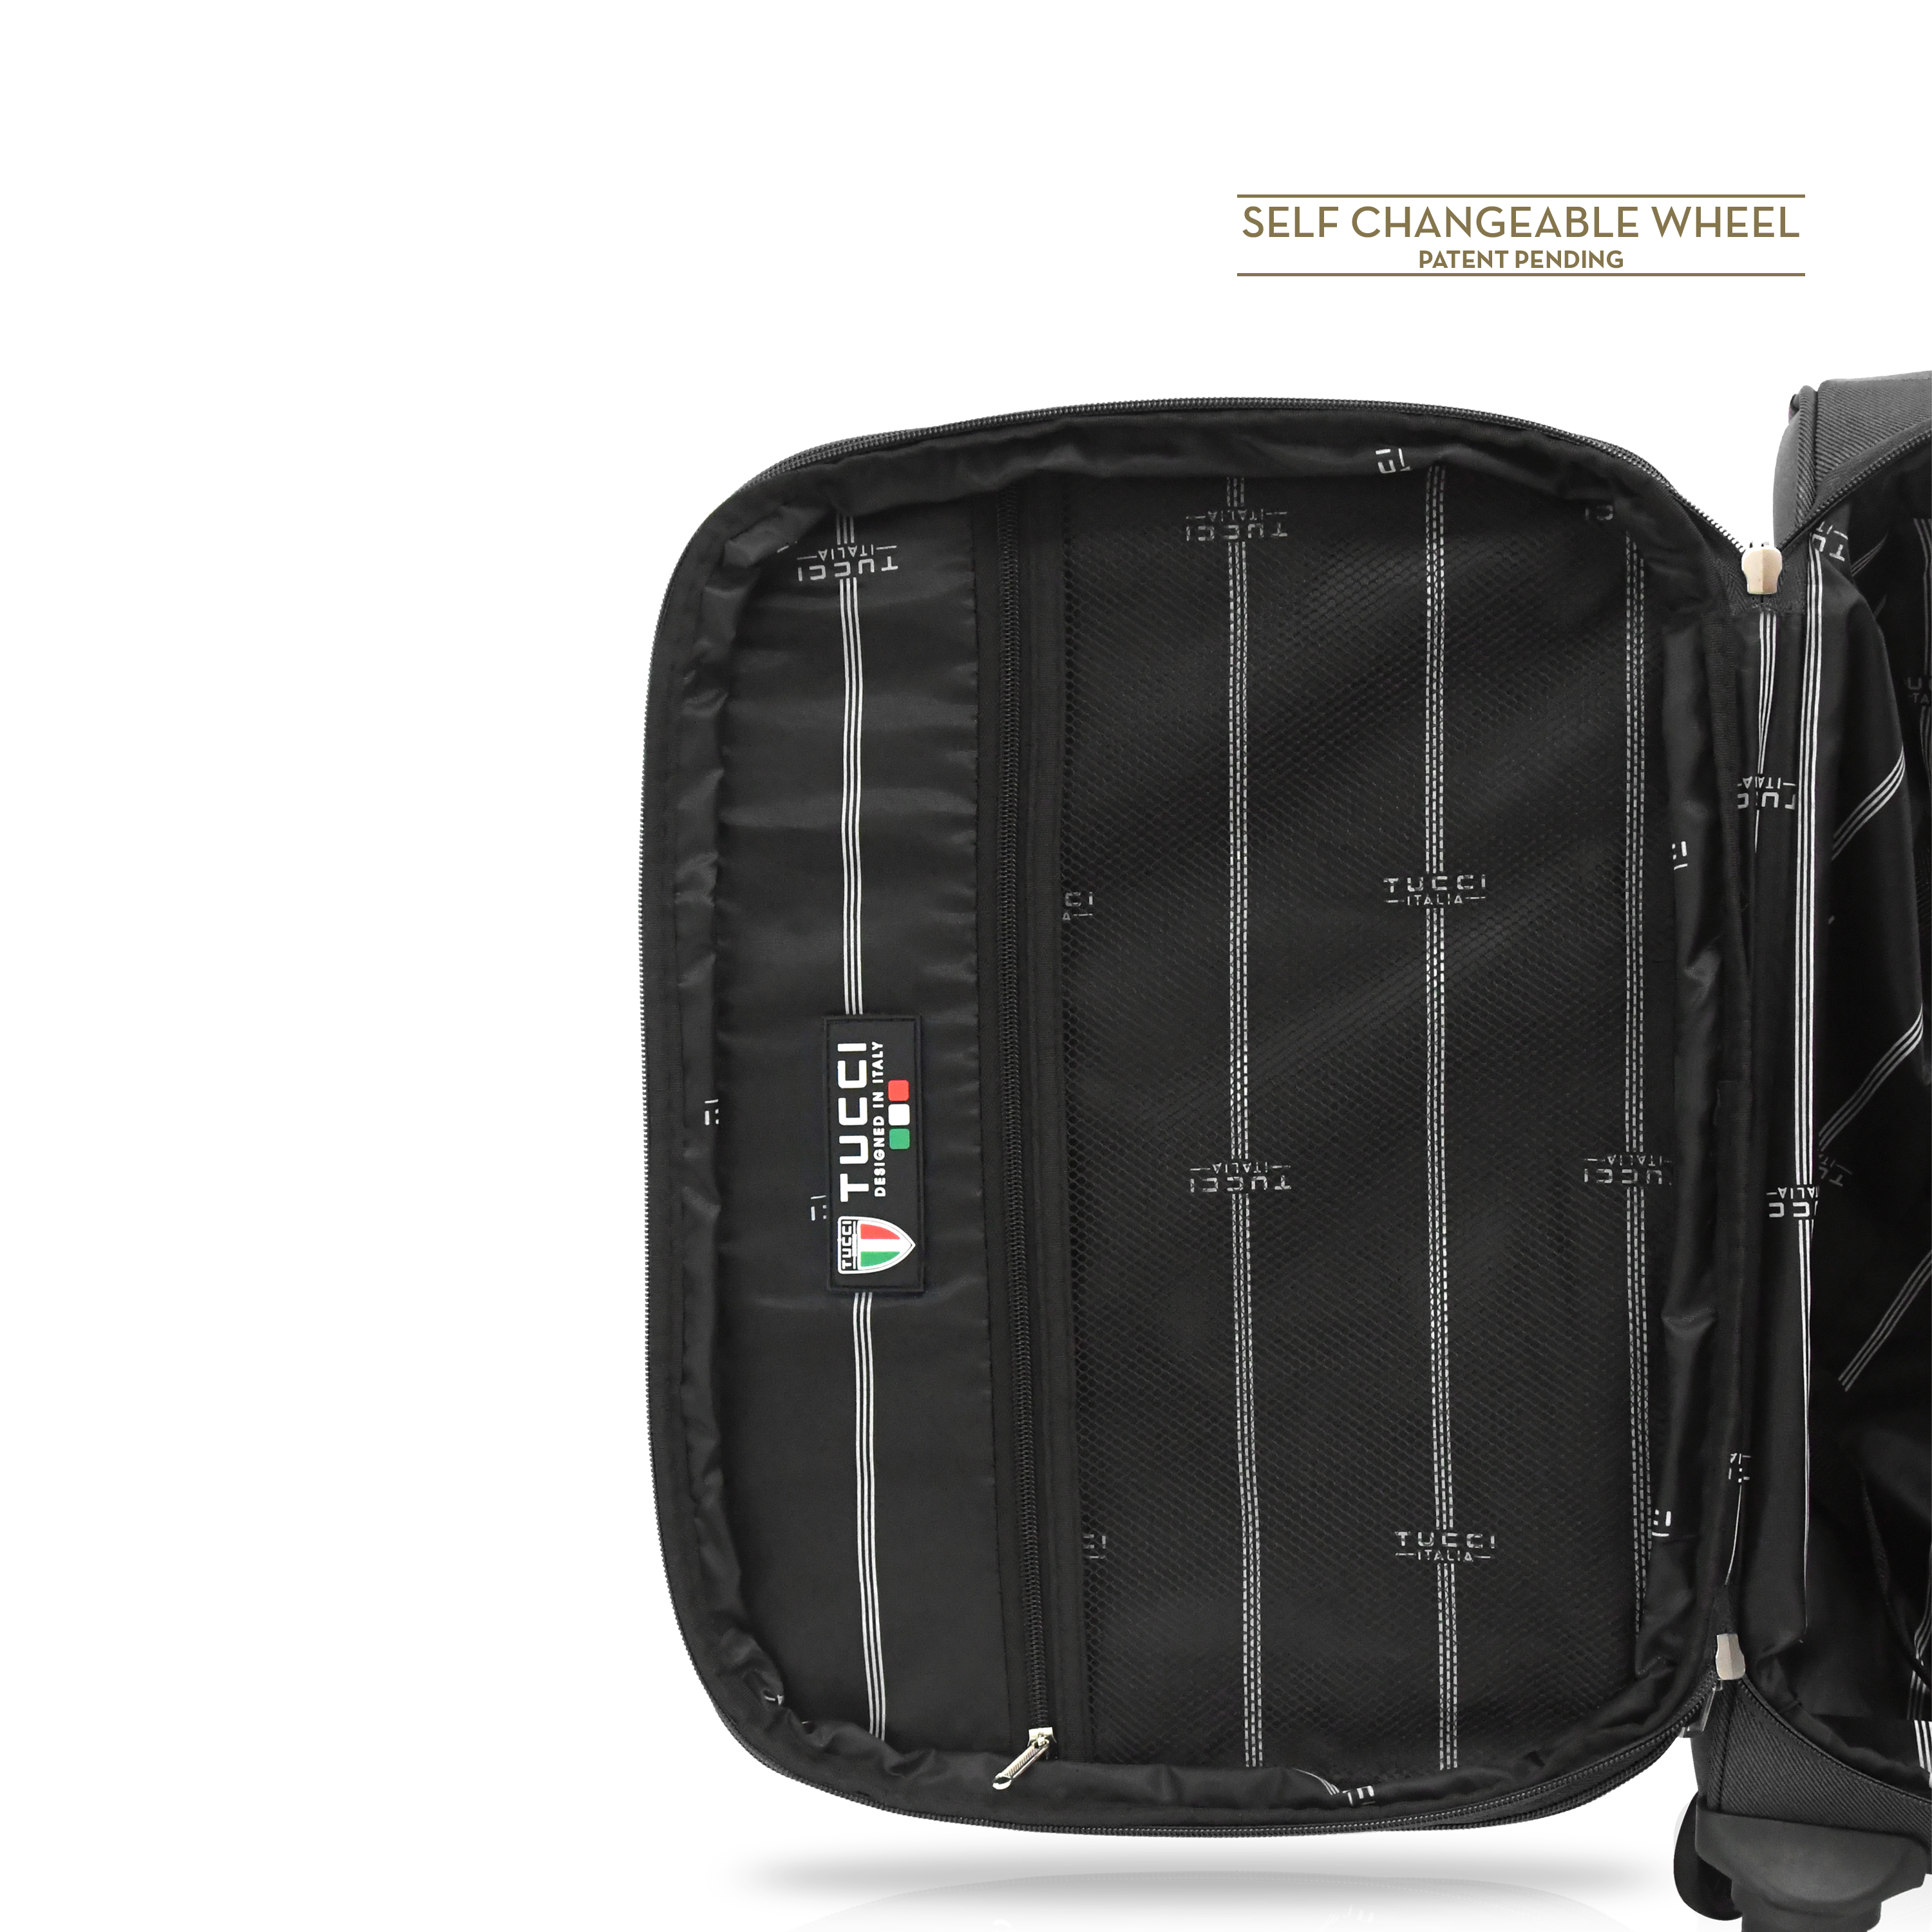 TUCCI Italy TURISTA 30-inch Large Spinner Luggage Suitcase